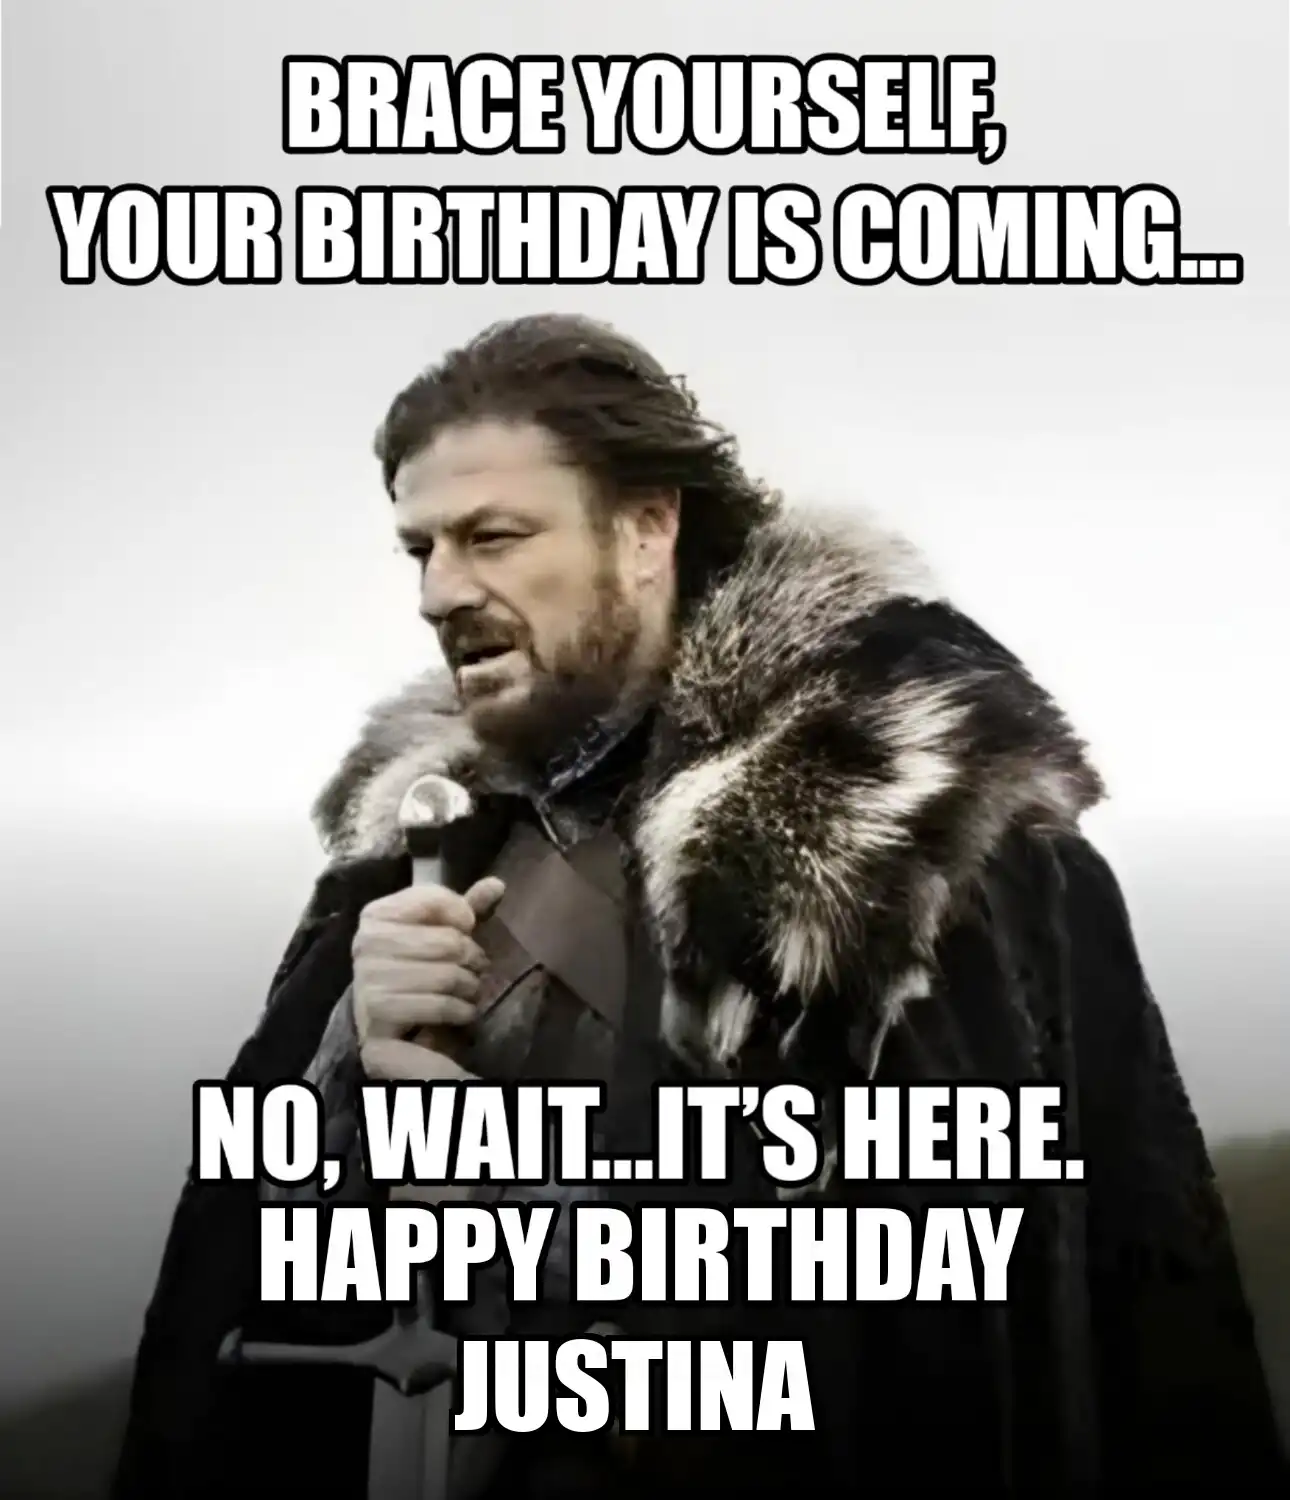 Happy Birthday Justina Brace Yourself Your Birthday Is Coming Meme